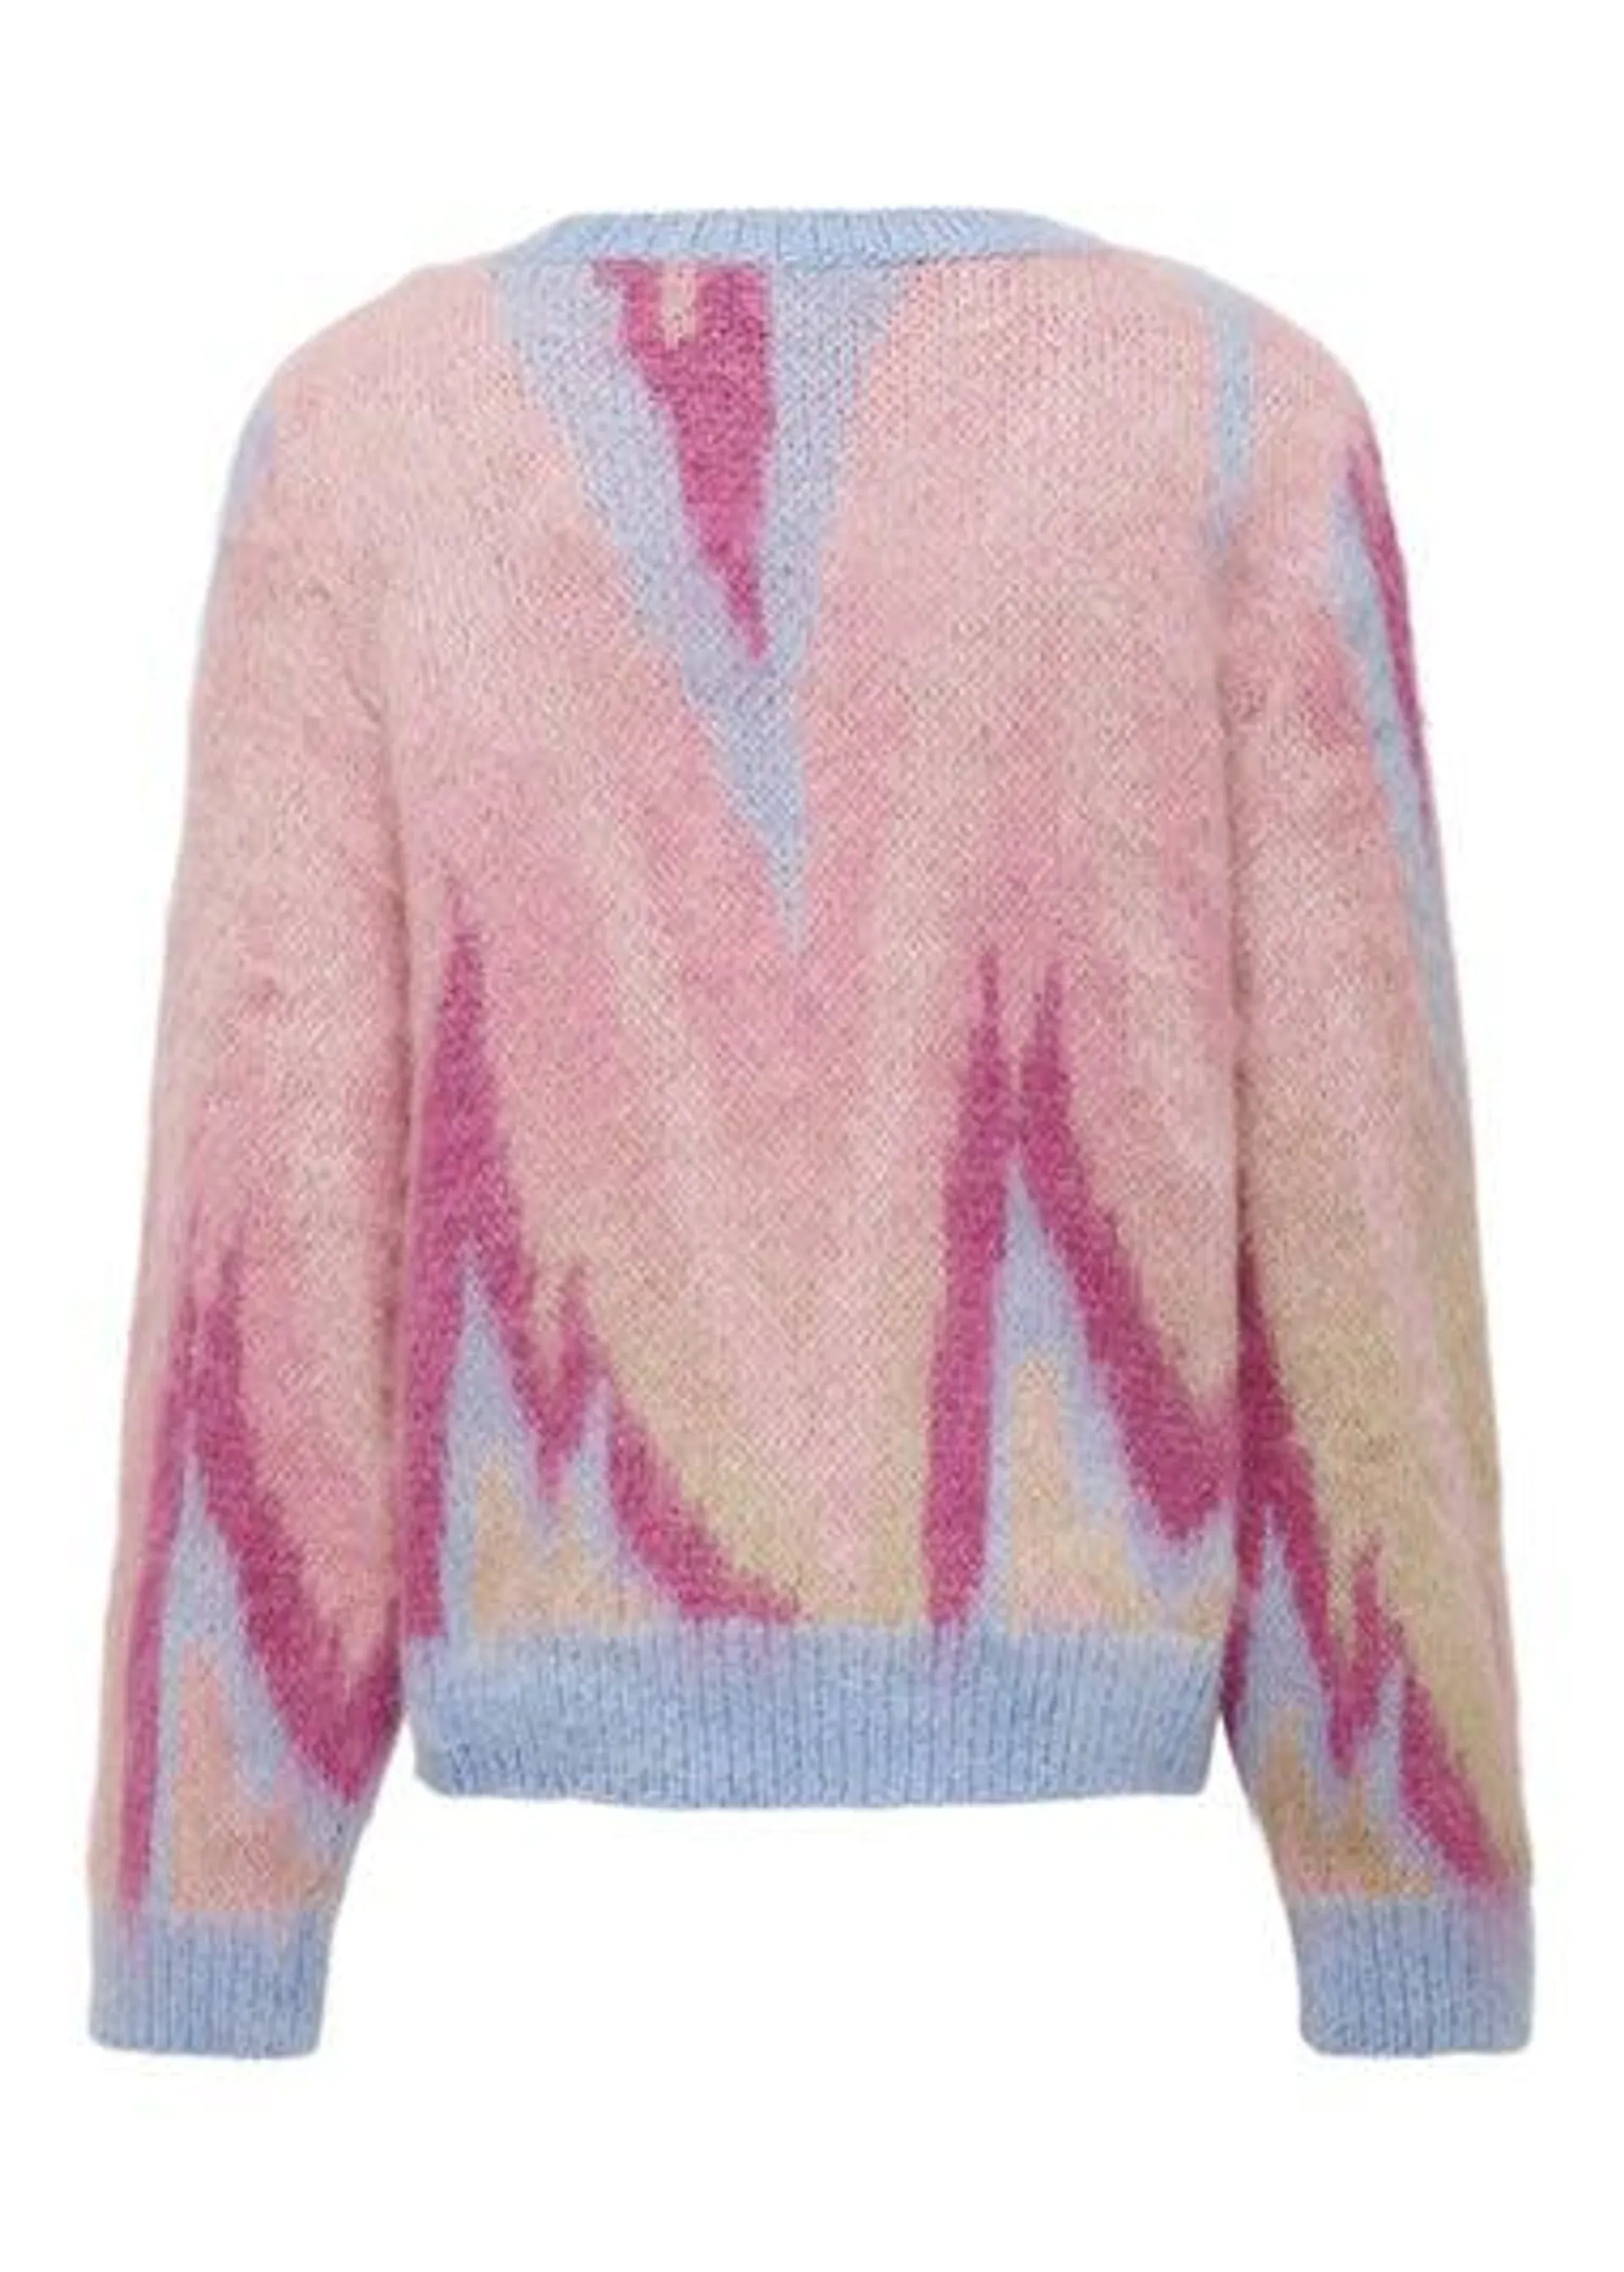 ONLY Girls Multicoloured Long Sleeve Knit Jumper (5-14yrs) - Age 11 - 12 Years